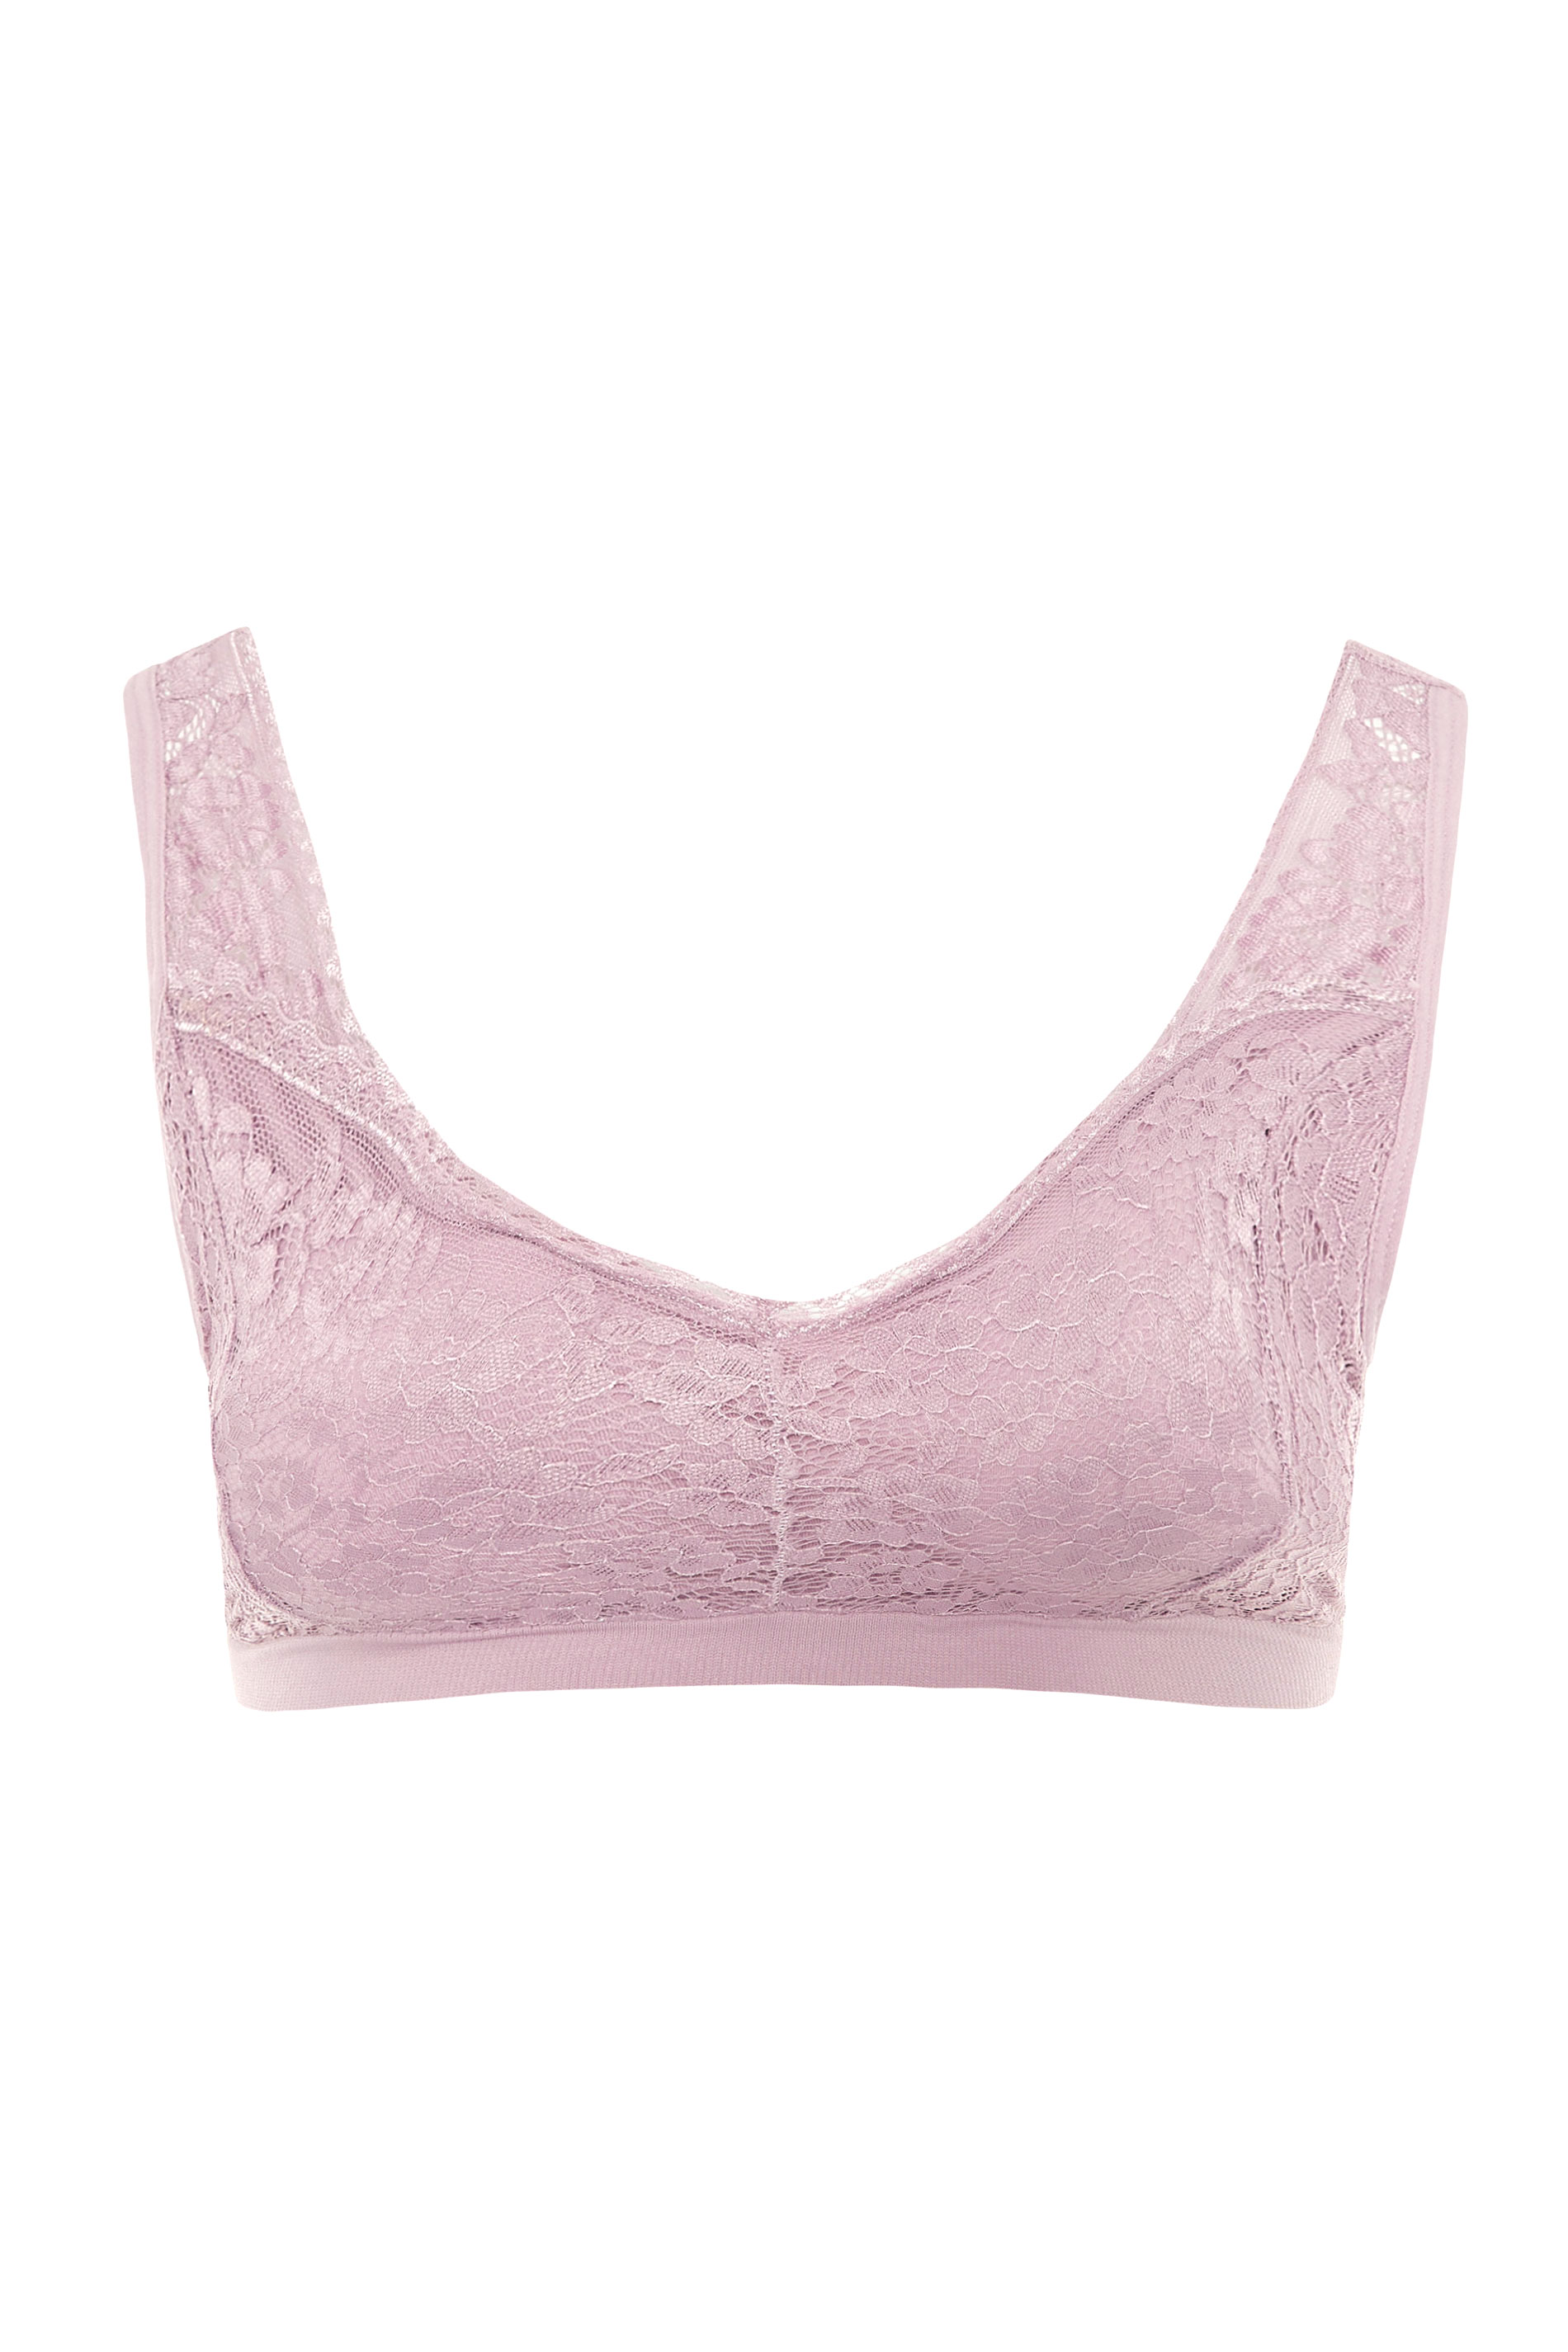 Plus Size Pink Seamless Lace Padded Non-Wired Bralette | Yours Clothing 3